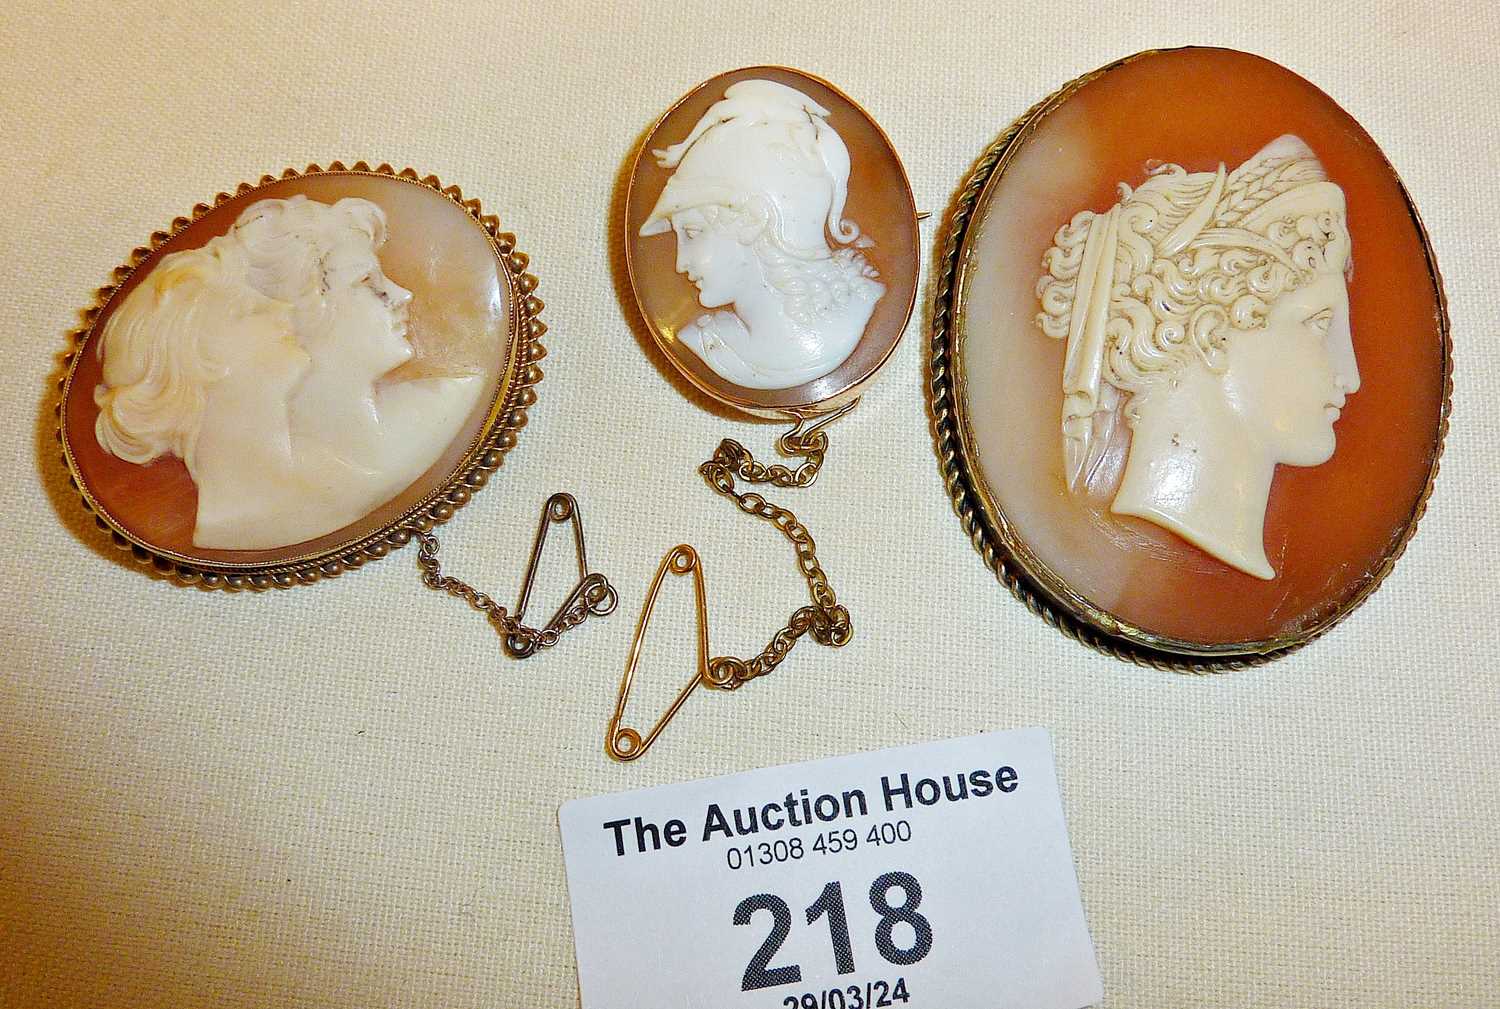 Three antique shell cameo brooches, largest finely carved classical lady profile - approx. 5cm high, - Image 6 of 6